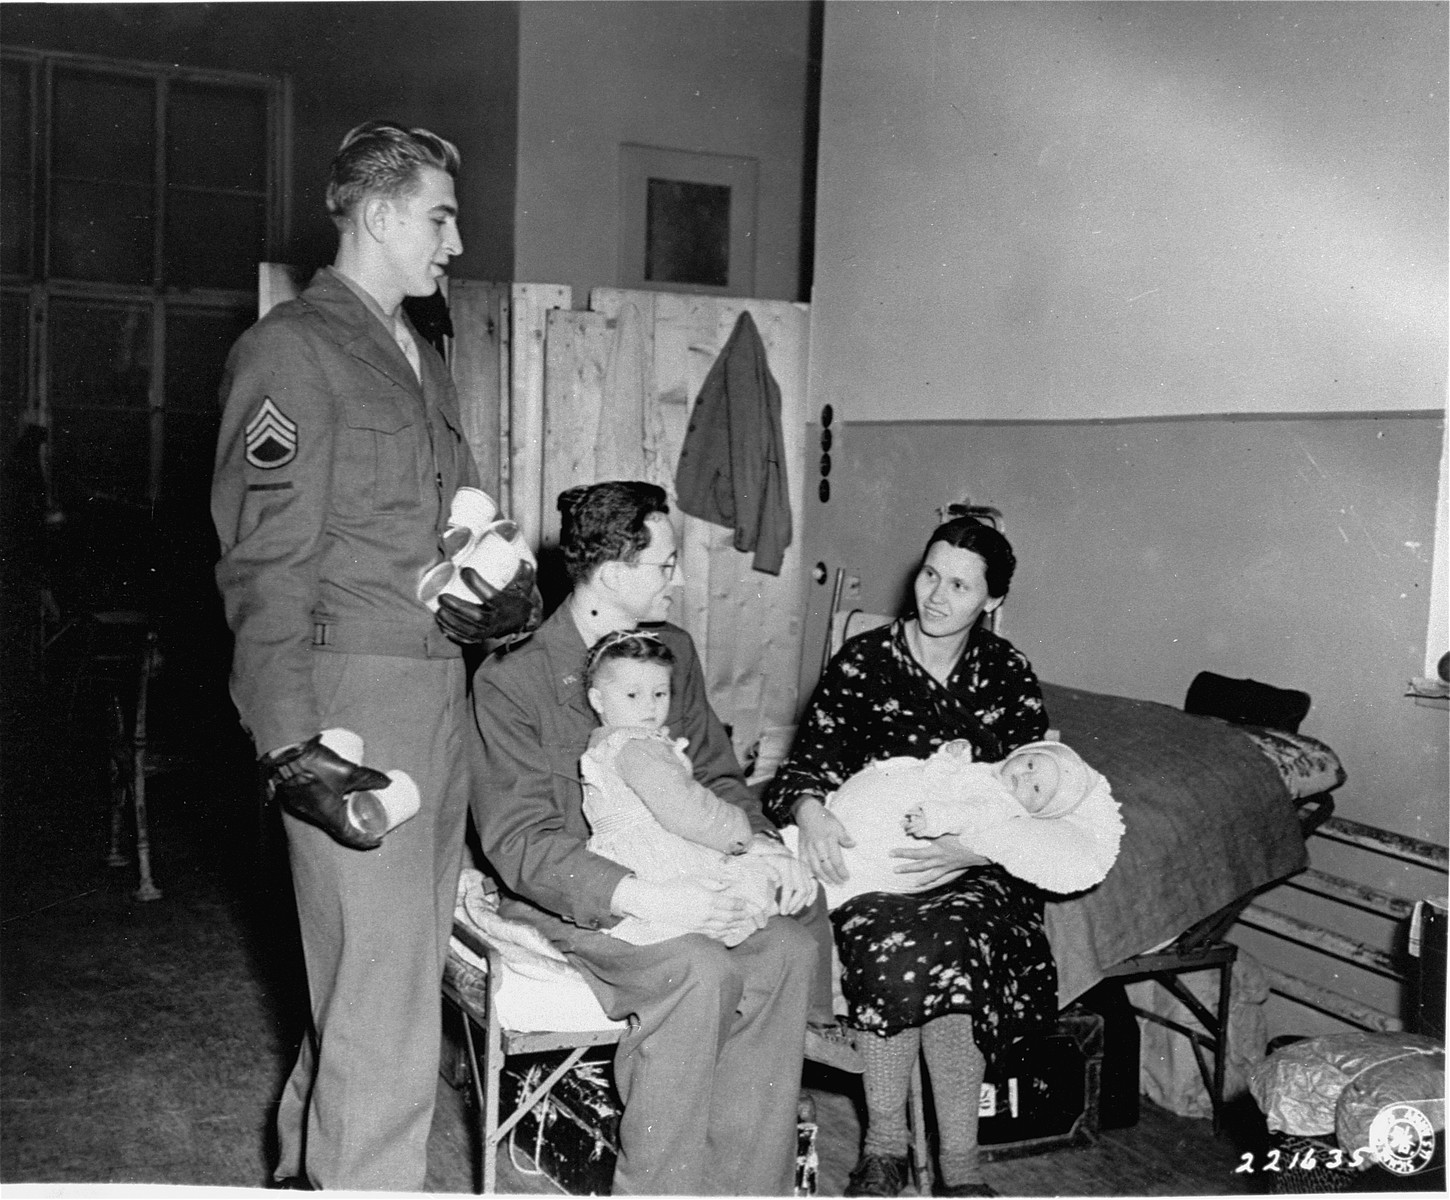 Sgt. Edward Bolshefski, of the Vienna Area Command, attached to the displaced persons' section (G-5), brings milk for Jewish DP children at a refugee center in Vienna. 

American Jewish Joint Distribution Committee field representative, James Rice, converses with the mother, while he holds one of her children in his lap.